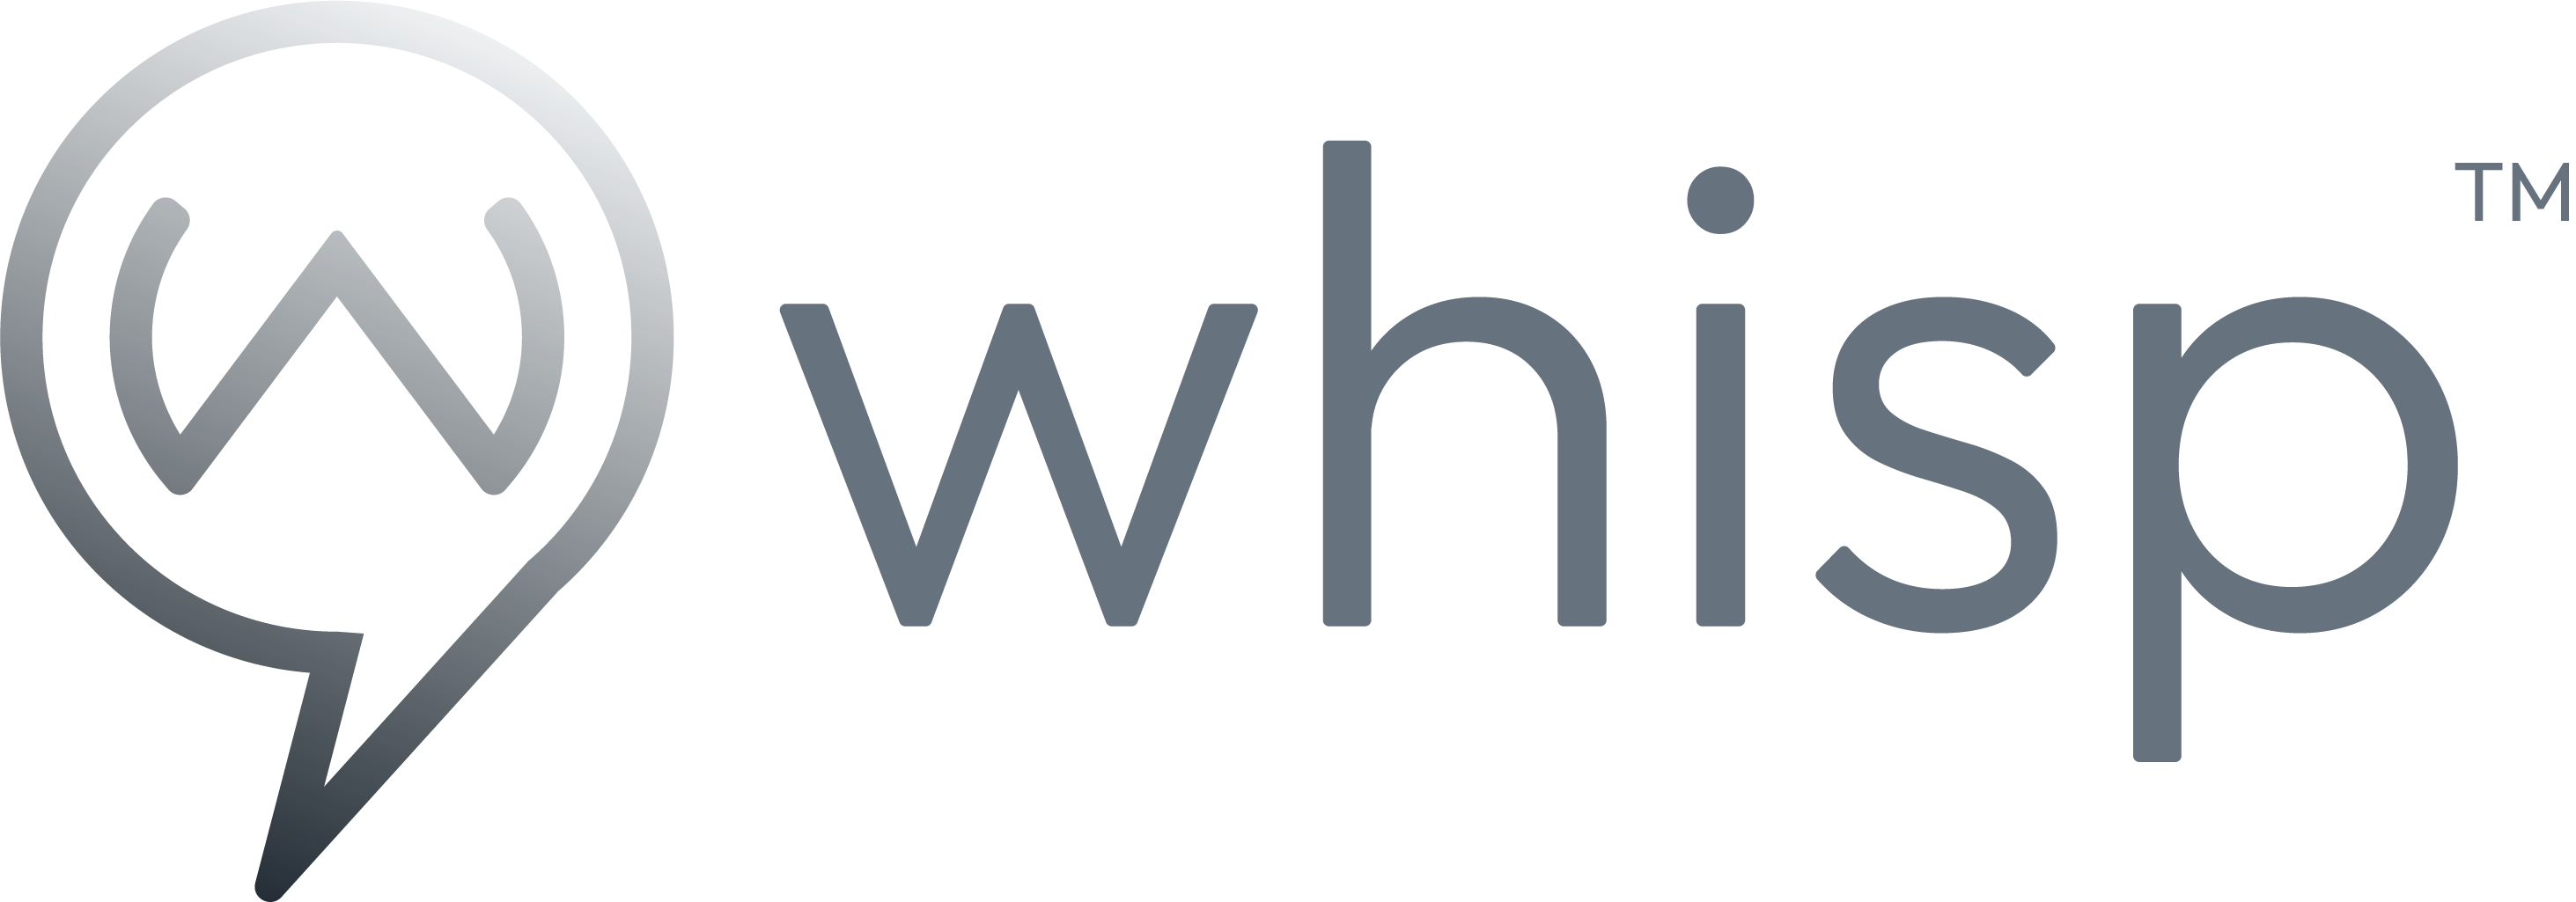 Whisp captures contact information from a various digital sources.